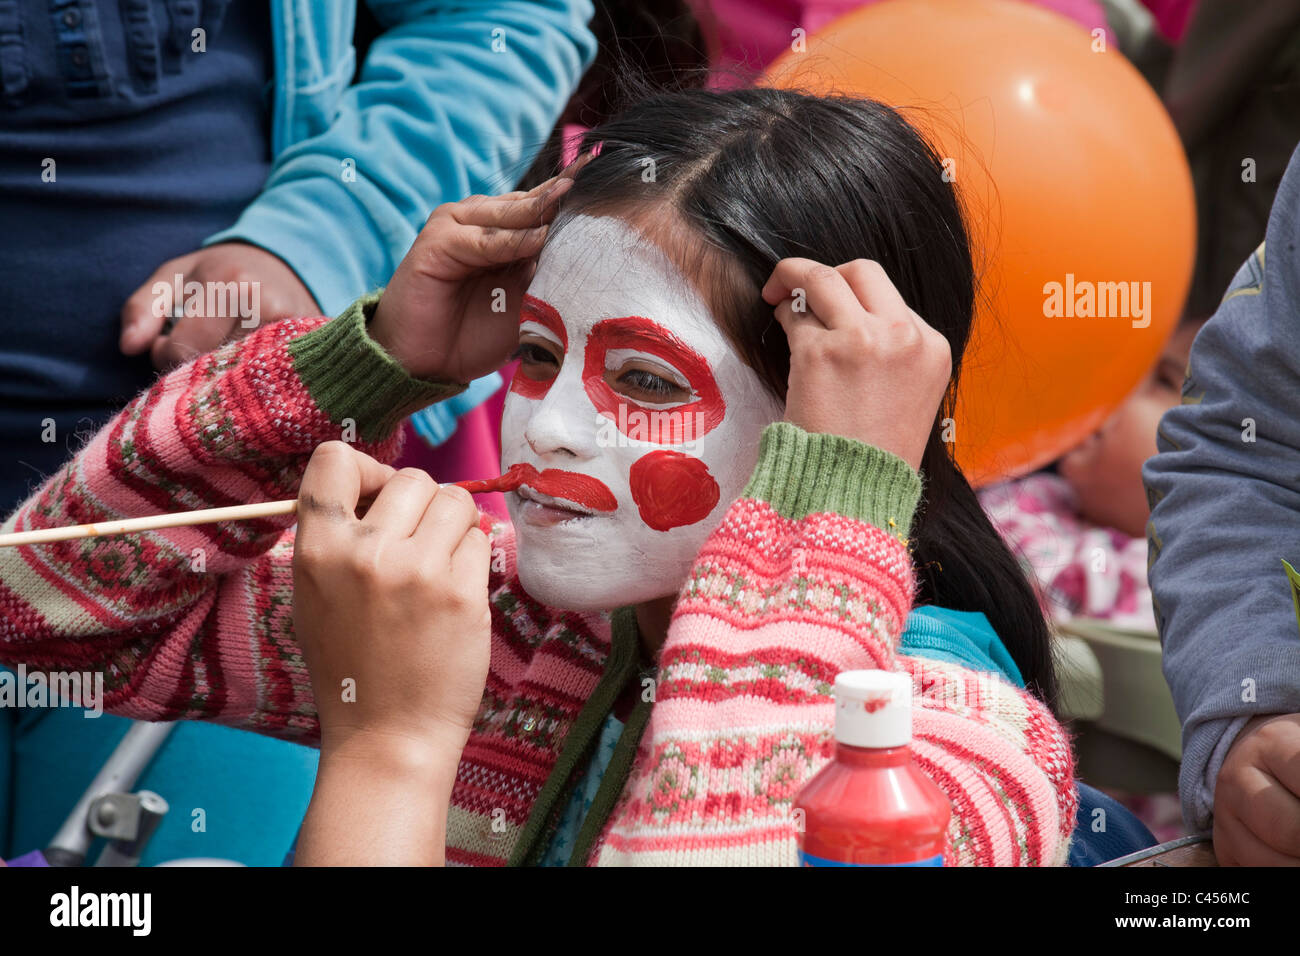 Detroit, Michigan - A girl gets her face painted at Dia de Los Niños, a children's fair in a Mexican-American neighborhood. Stock Photo